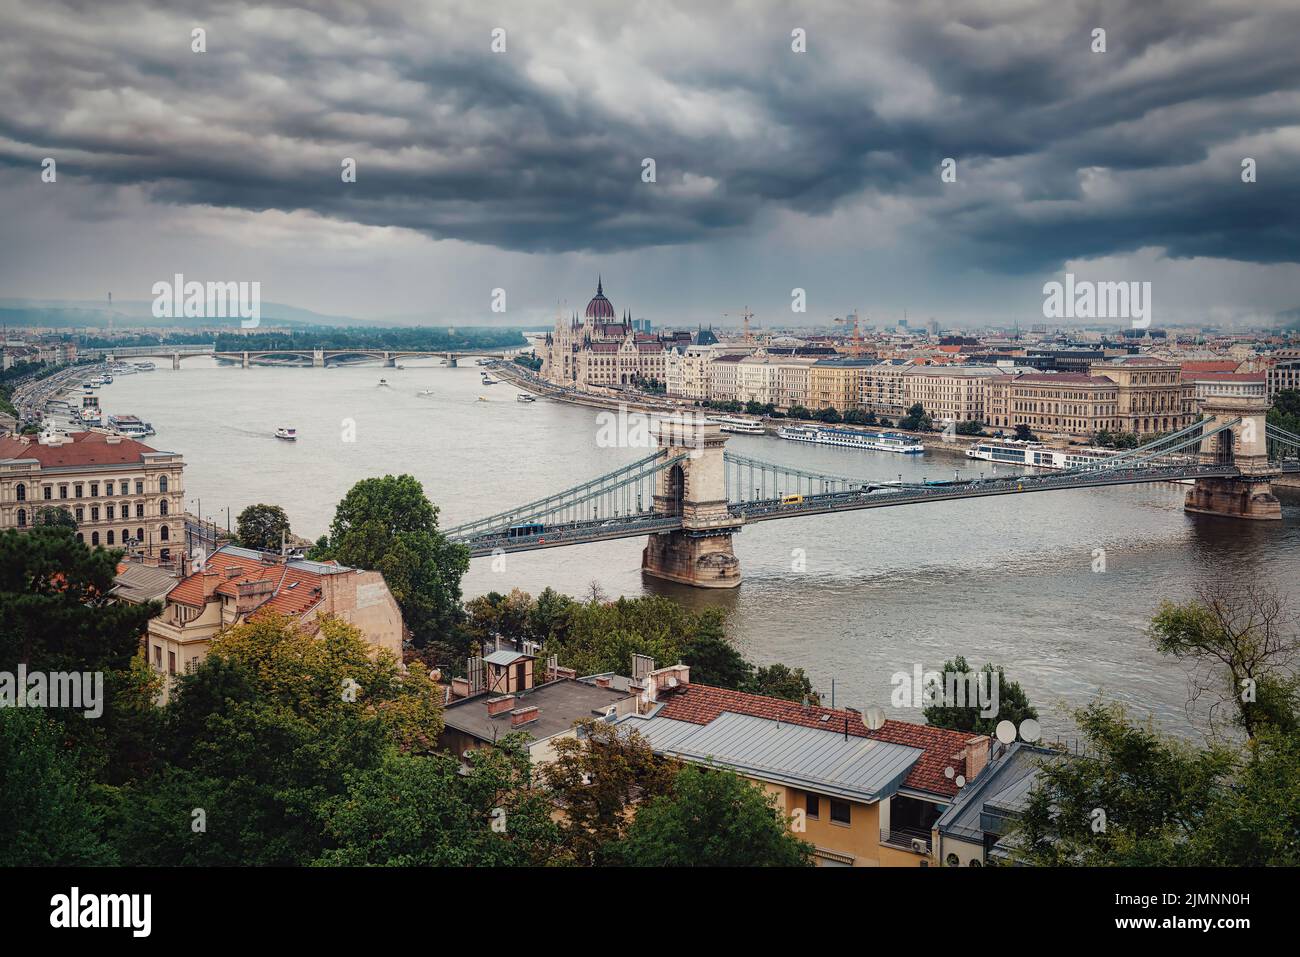 Thunderclouds on the parliament in Budapest, Hungary Stock Photo